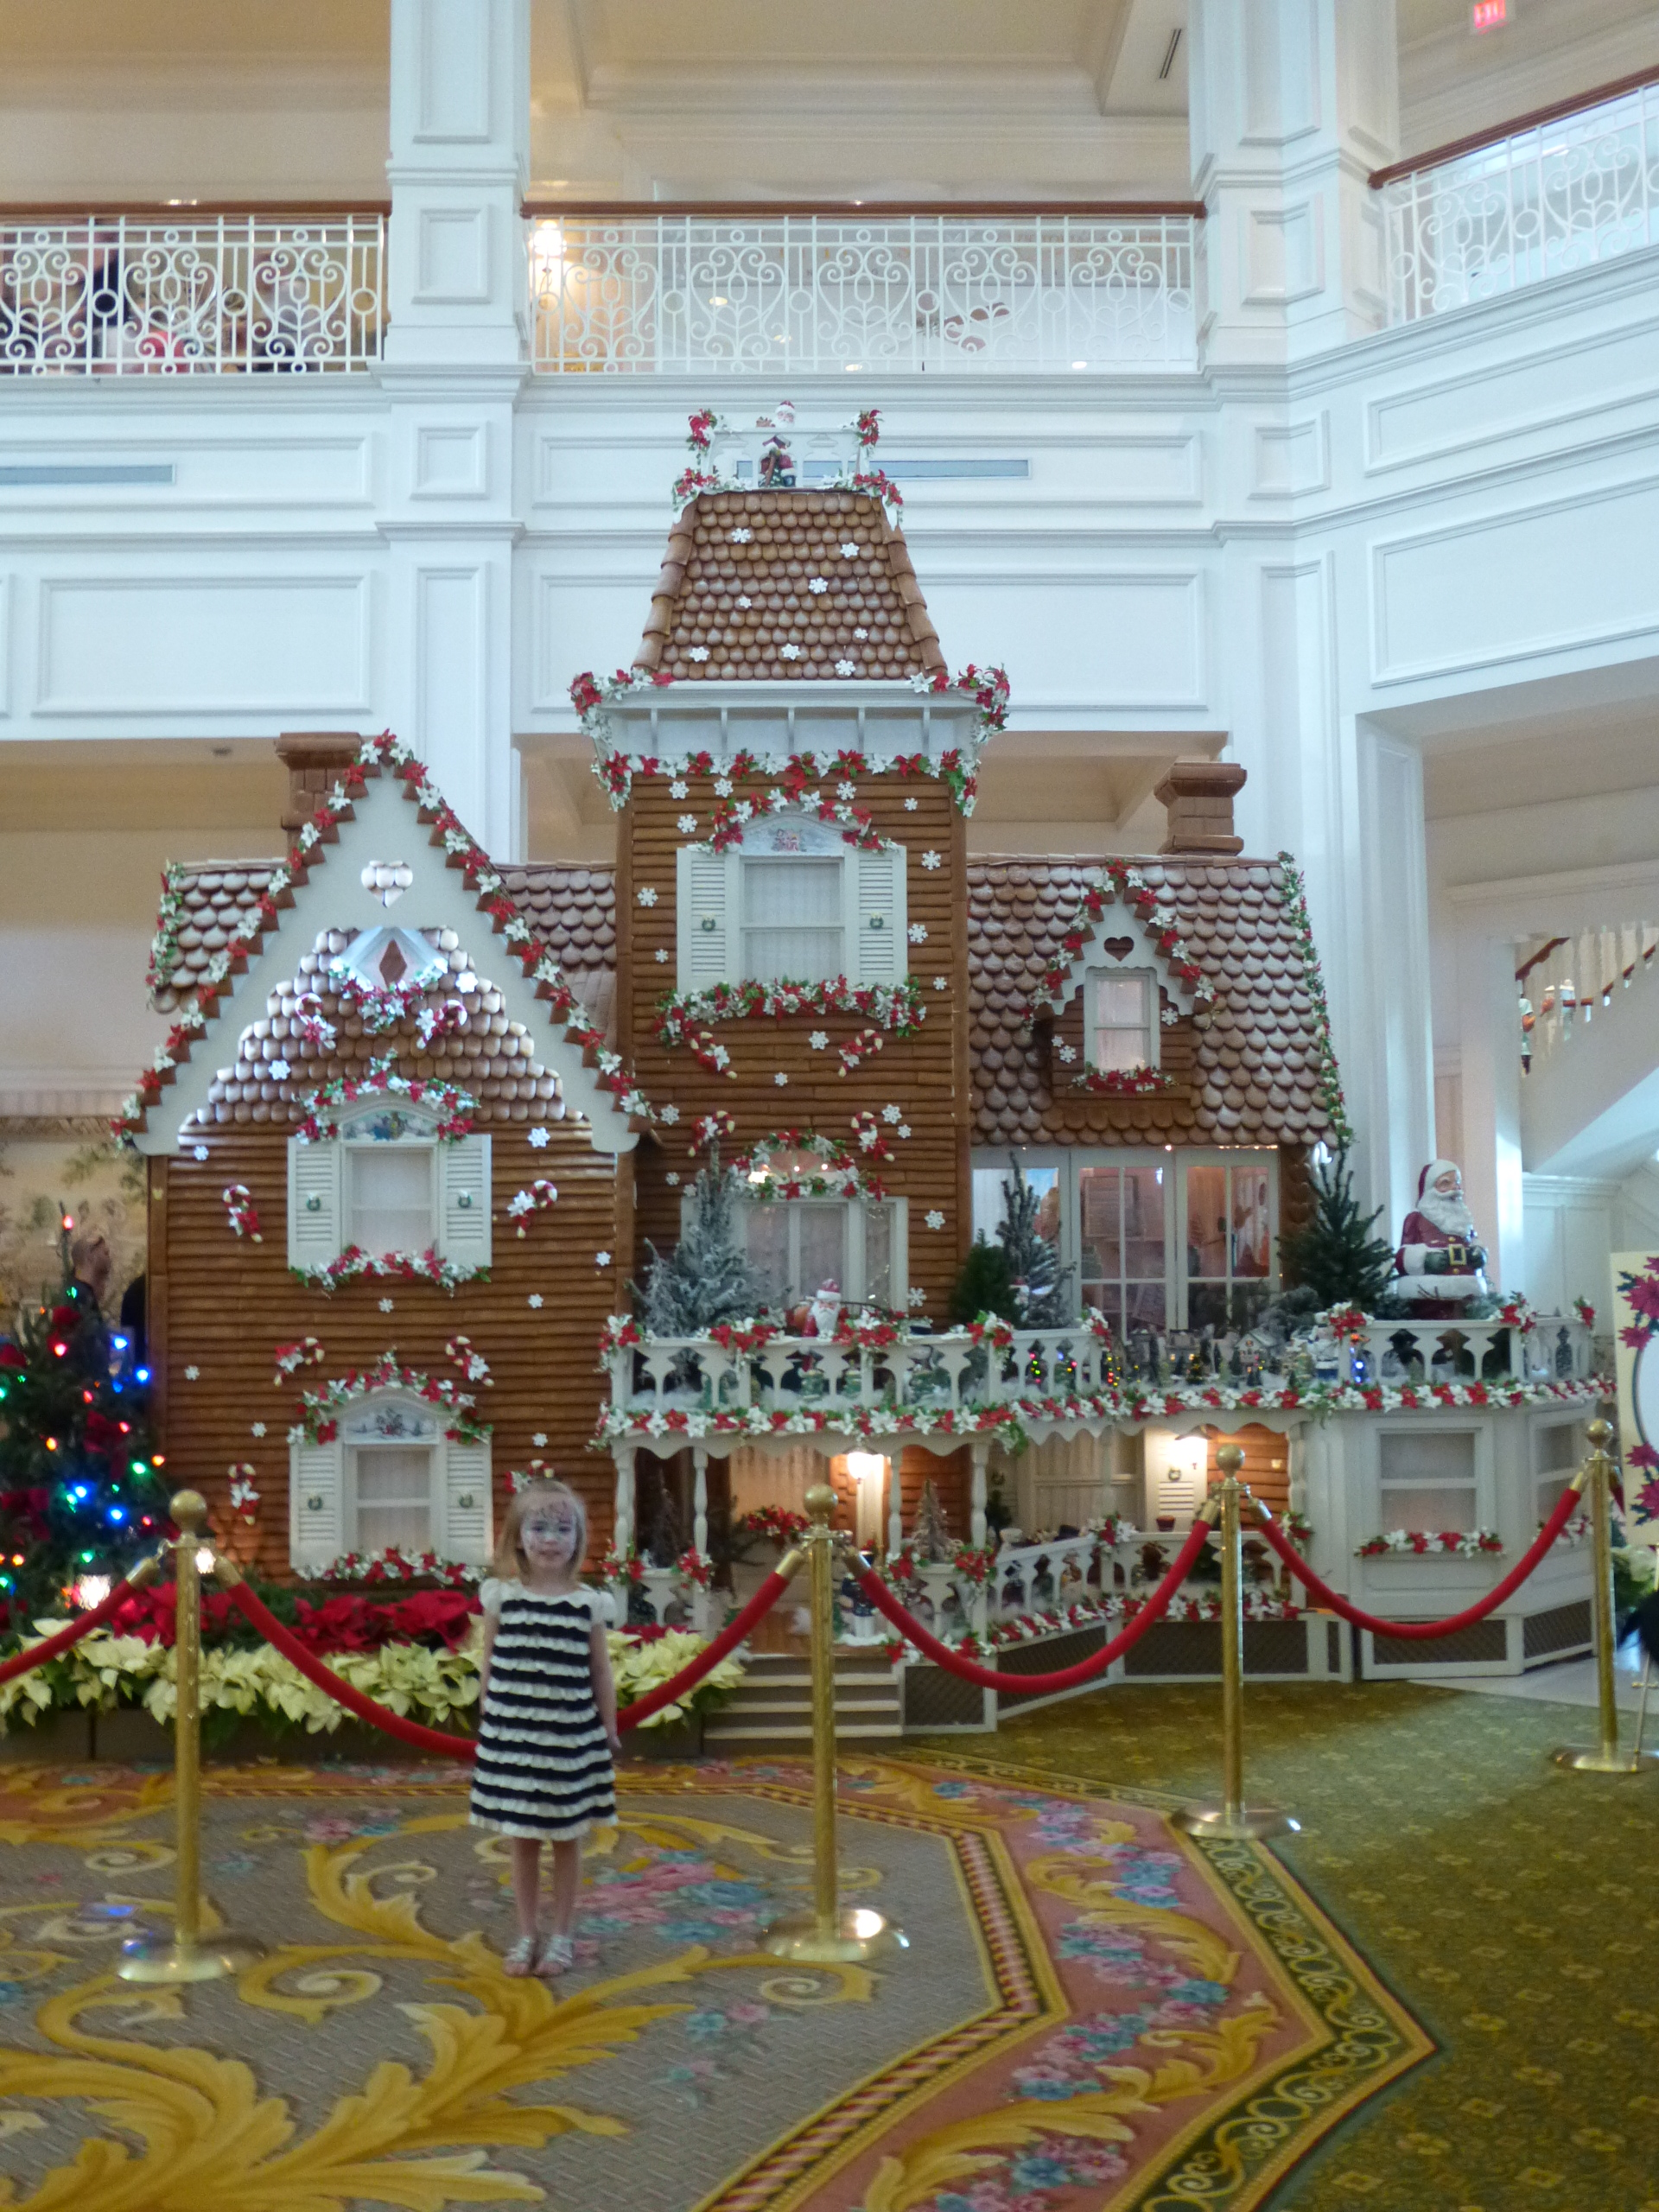 Disney’s Grand Floridian Resort & Spa’s Holiday Gingerbread House: Magical Sweetness